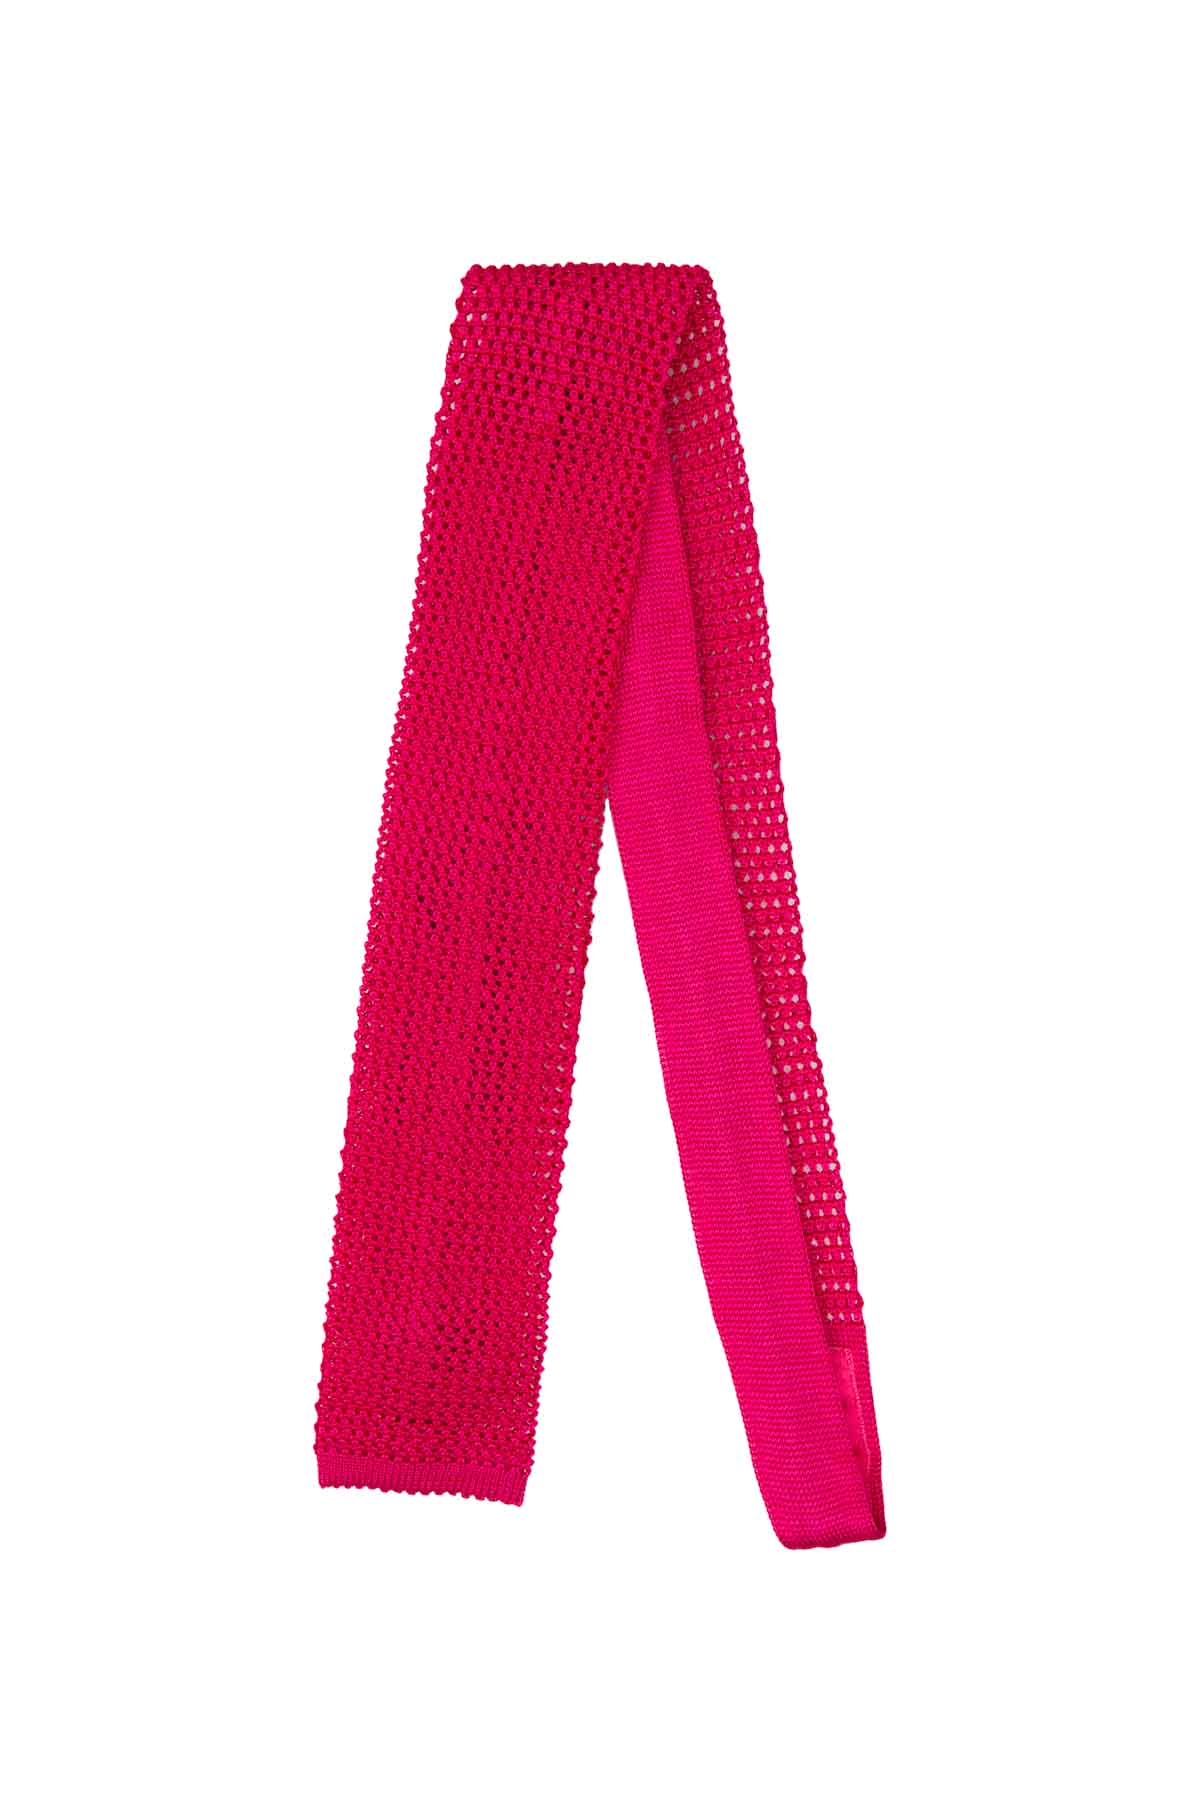 Italian Knitted Tie - Bright Pink